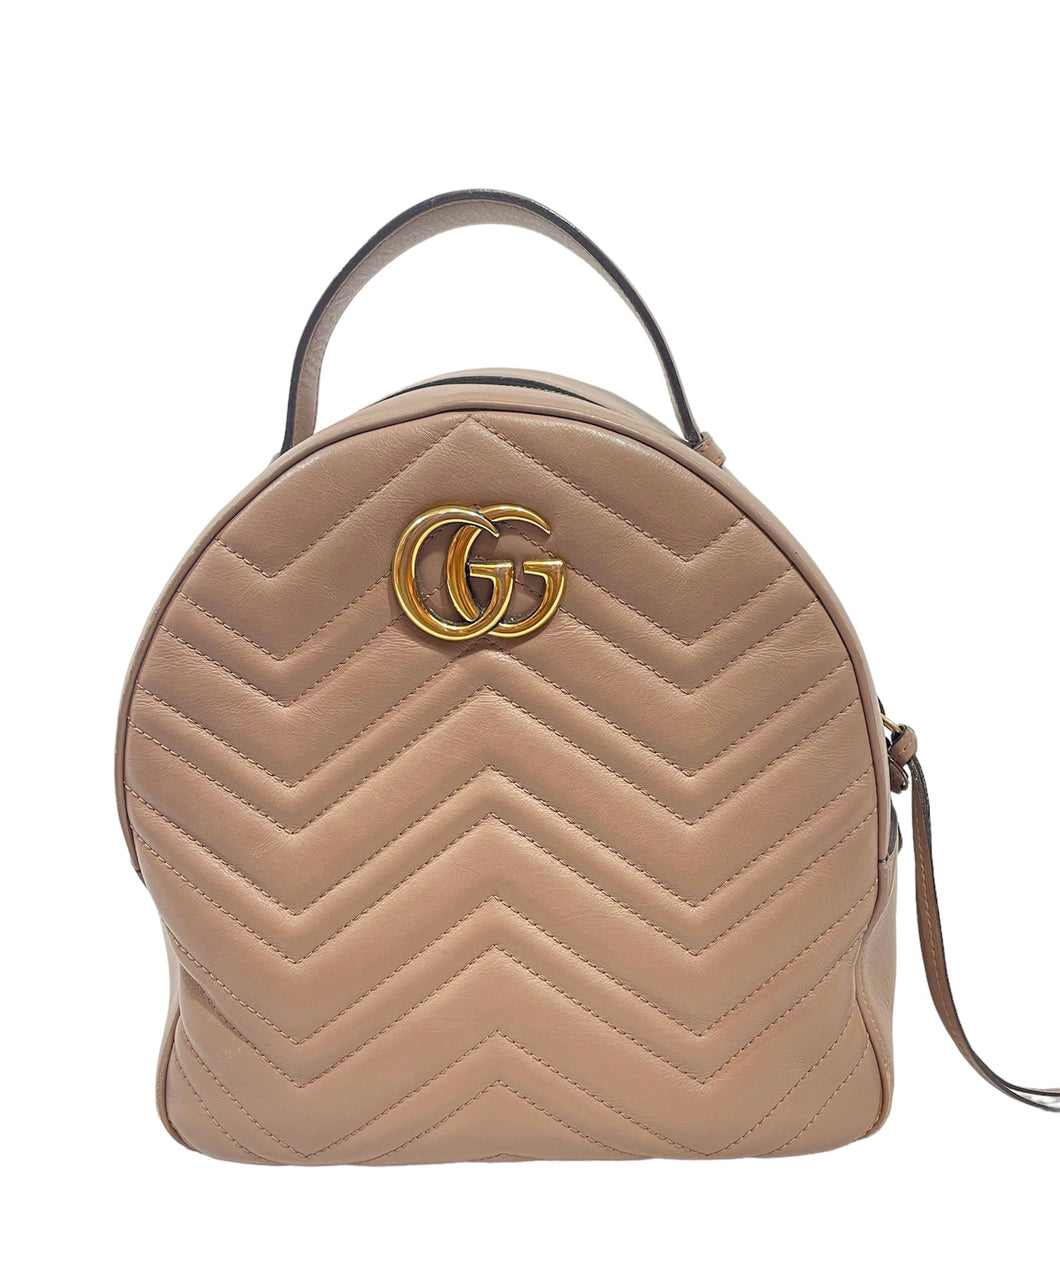 Gucci GG Marmont Backpack Matelasse Dusty Pink